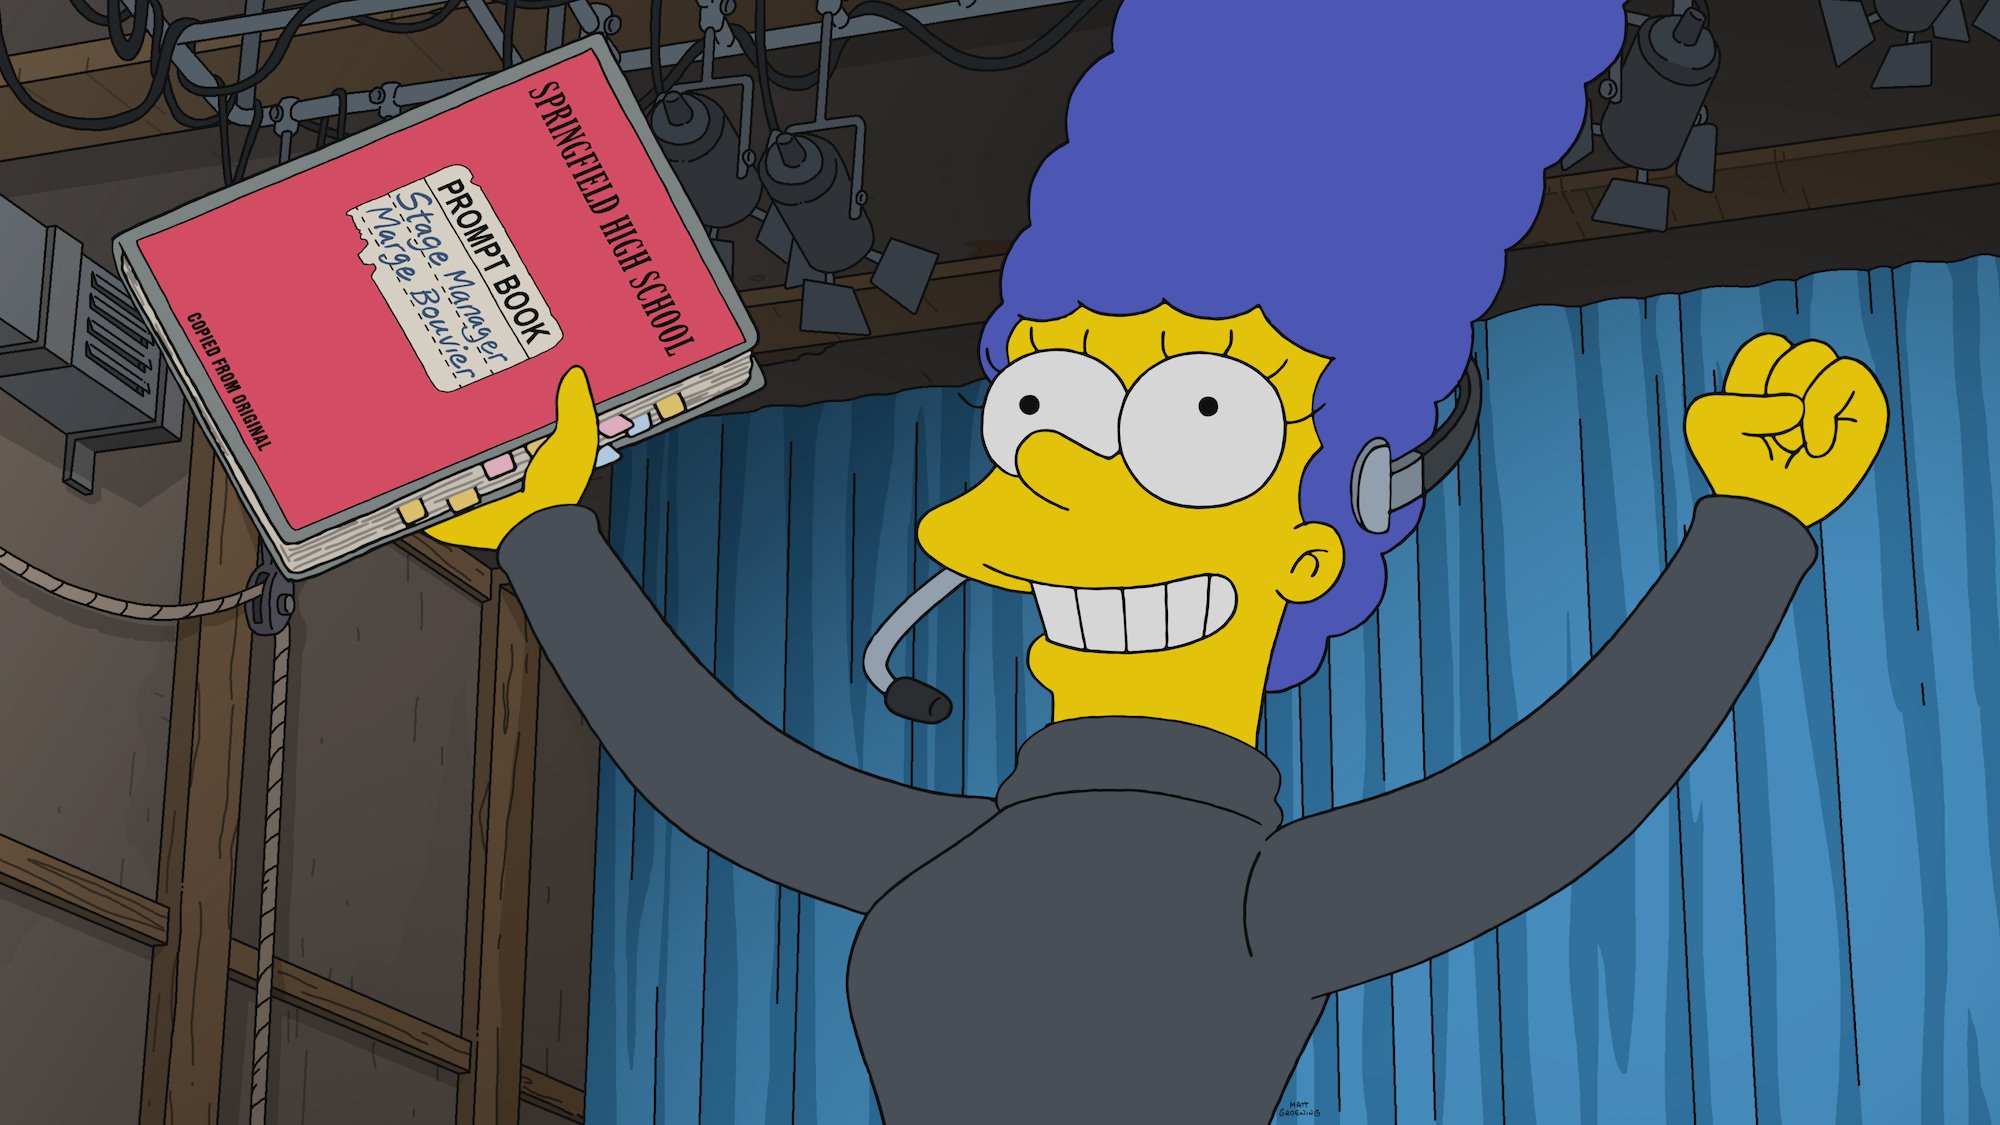 Marge Simpson raises her stage manager prompt book and sings with Kristen Bell's voice